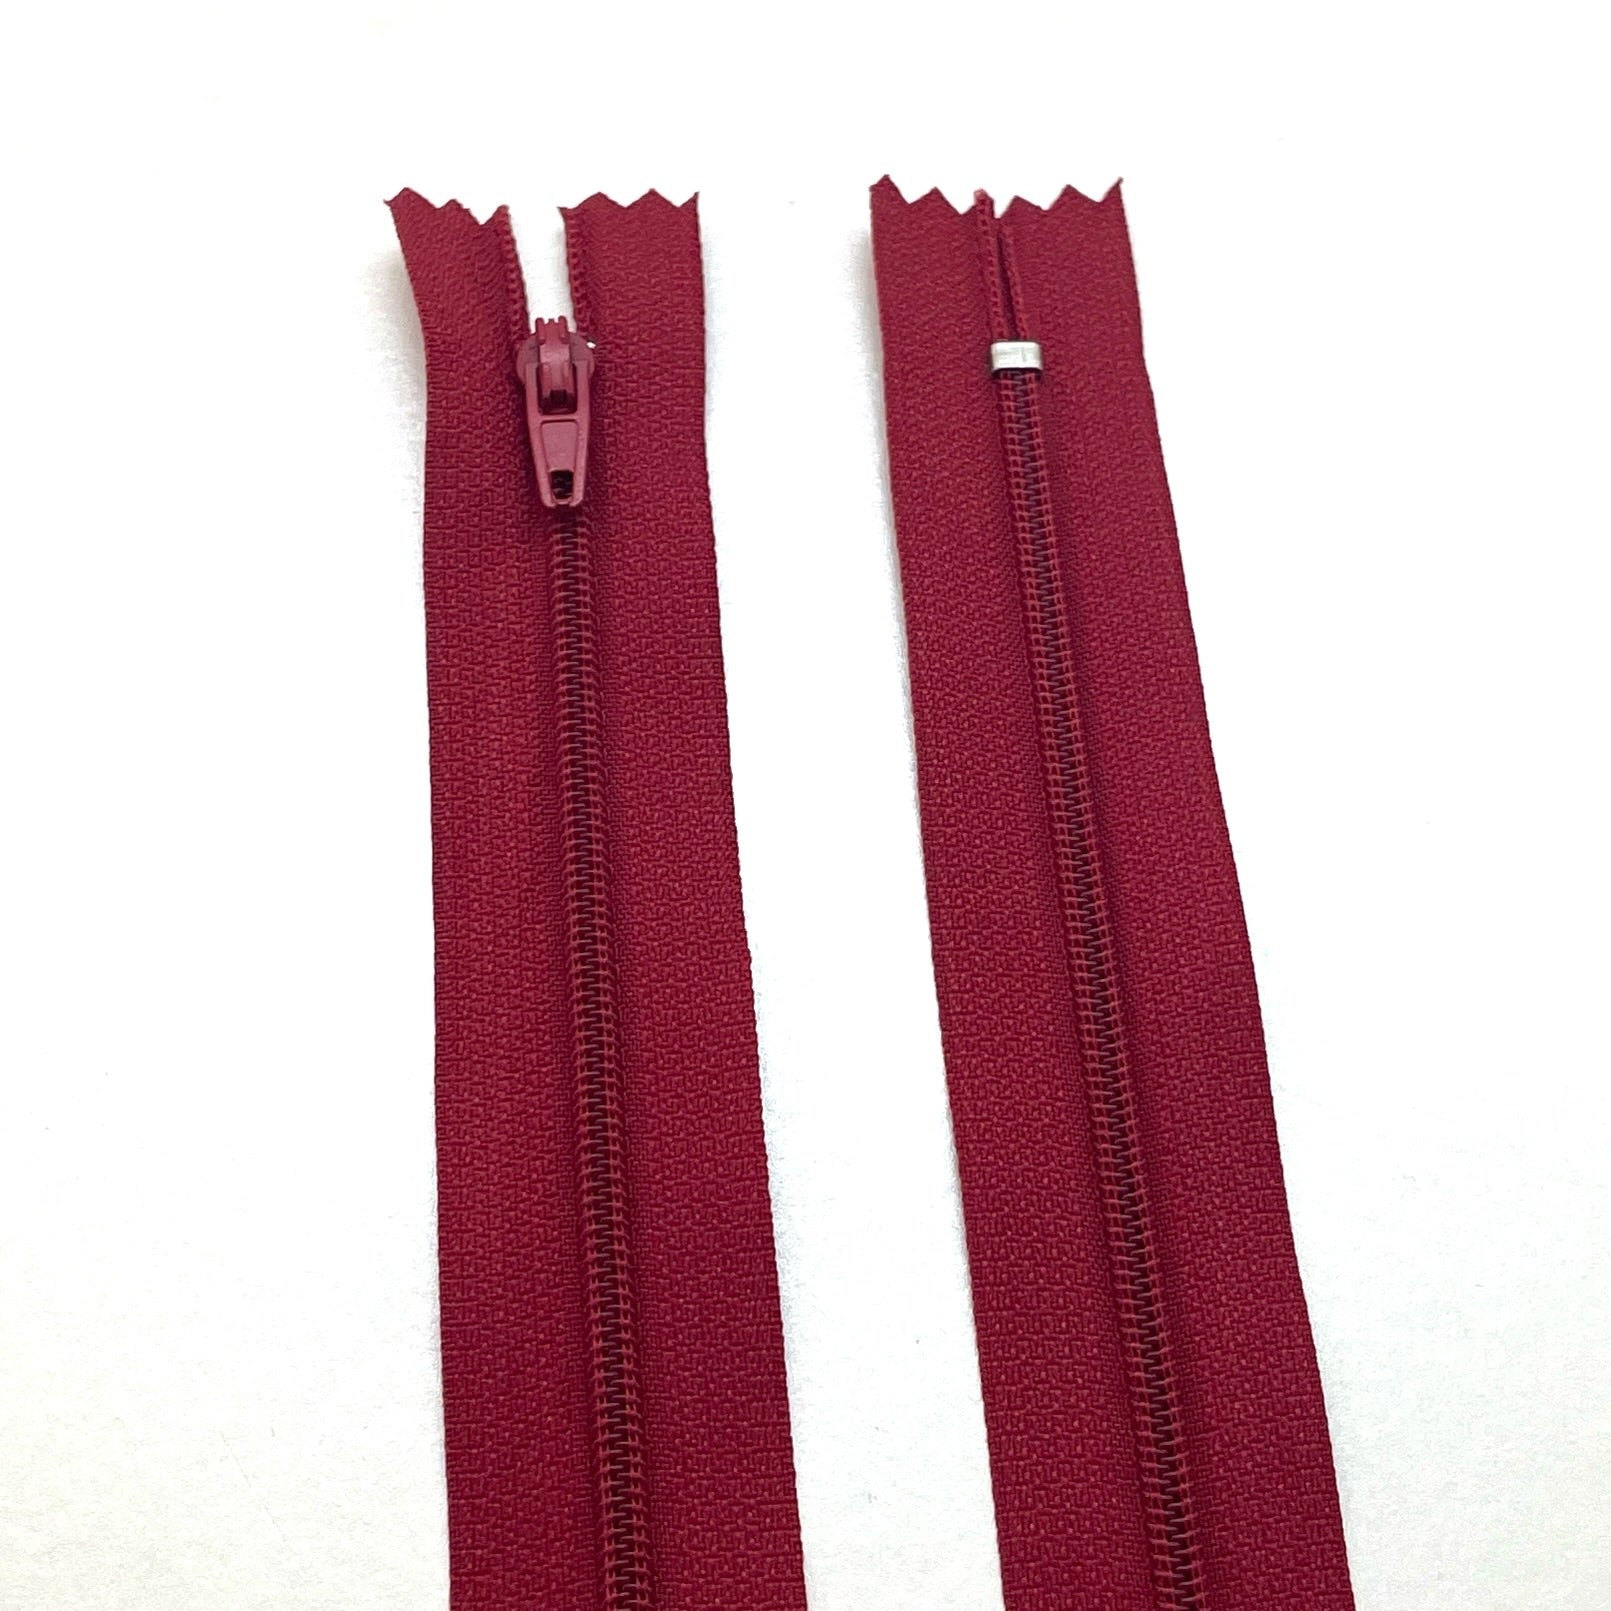 Nylon Closed End Zip size 3 Red Burgundy 163